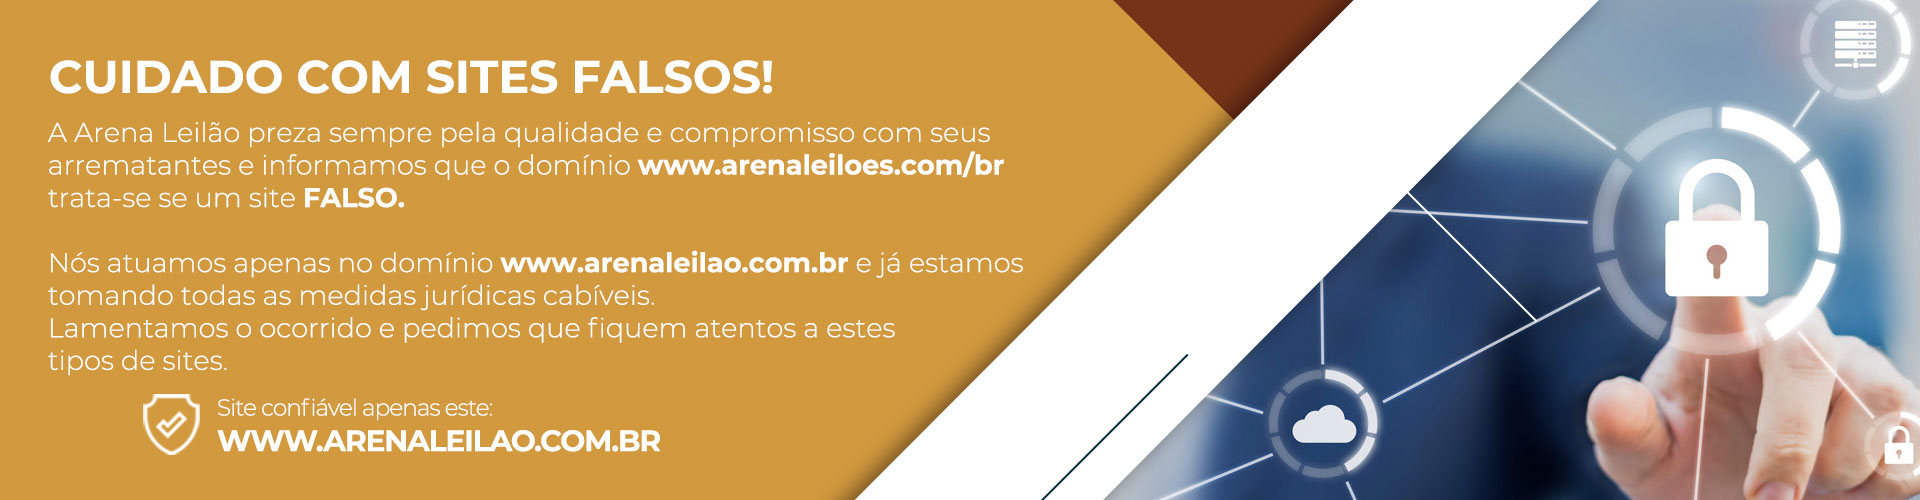 Banner Site Falso